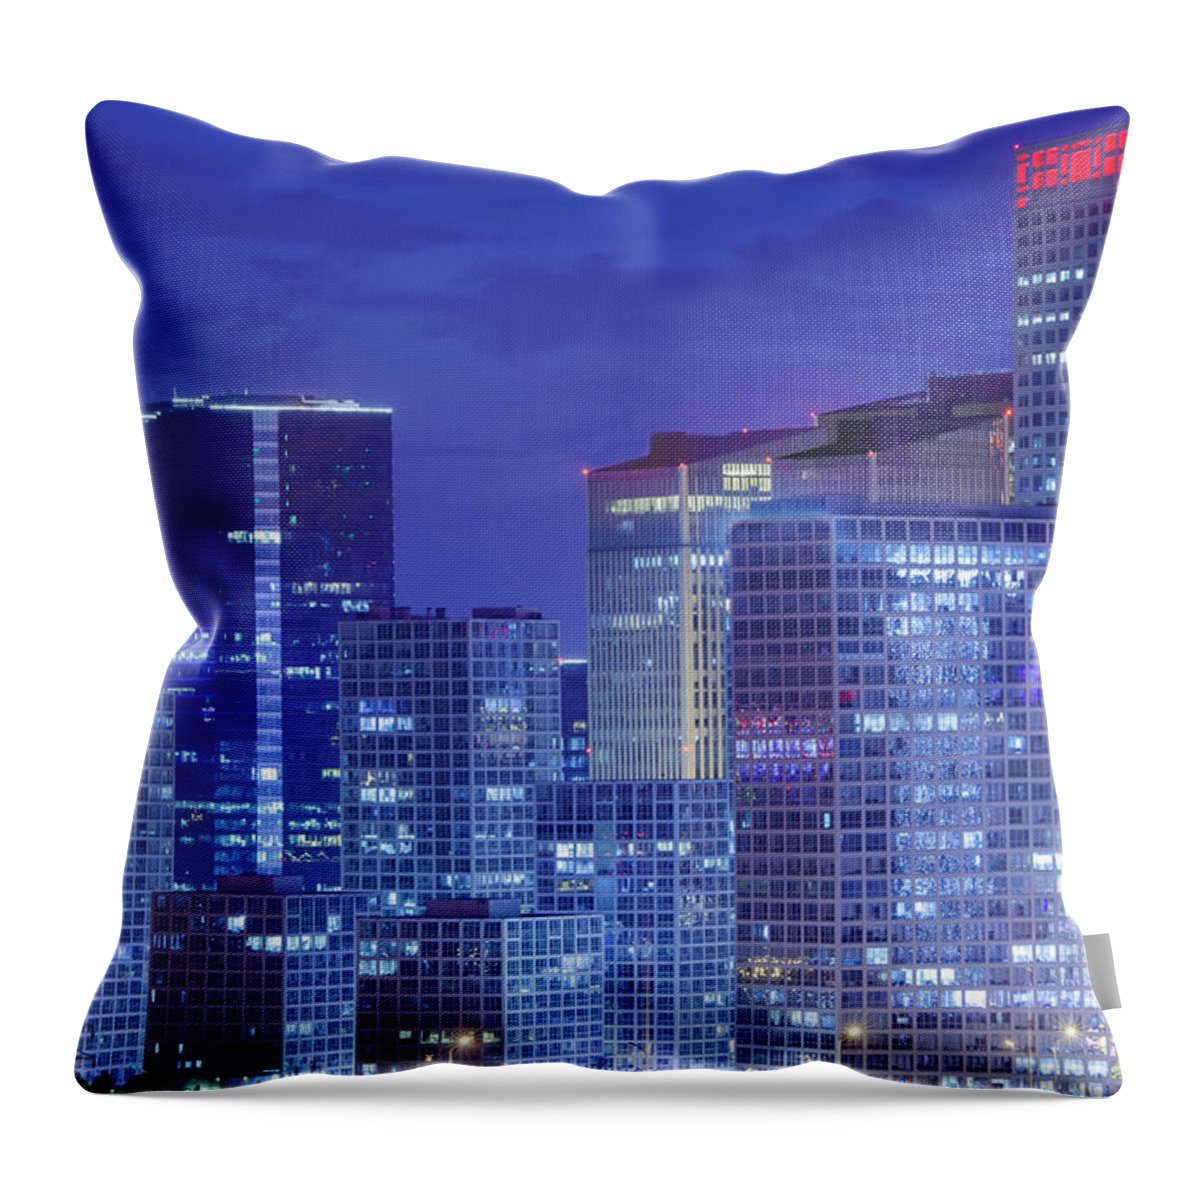 Tranquility Throw Pillow featuring the photograph Evening Cityscape Of Beijing Cbd Area by Czqs2000 / Sts